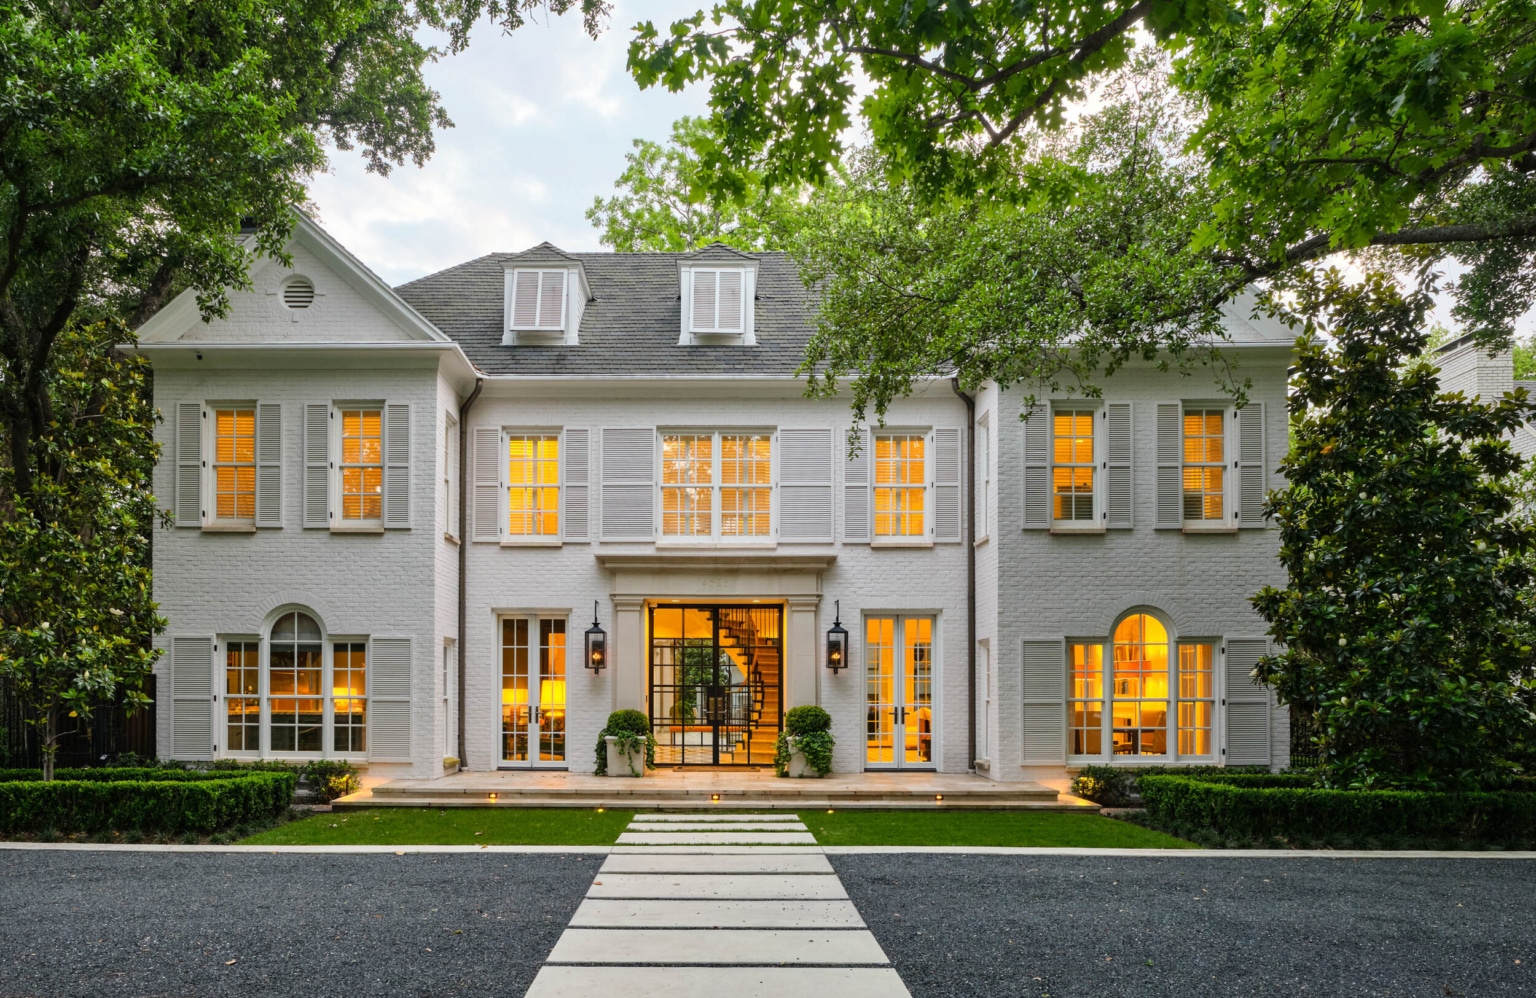 Mary Beth Wagner Interiors | Nathan Schroder Photography | blog post | white house | curb appeal | exterior | architect | architecture | dormers | white shutters | steel doors 